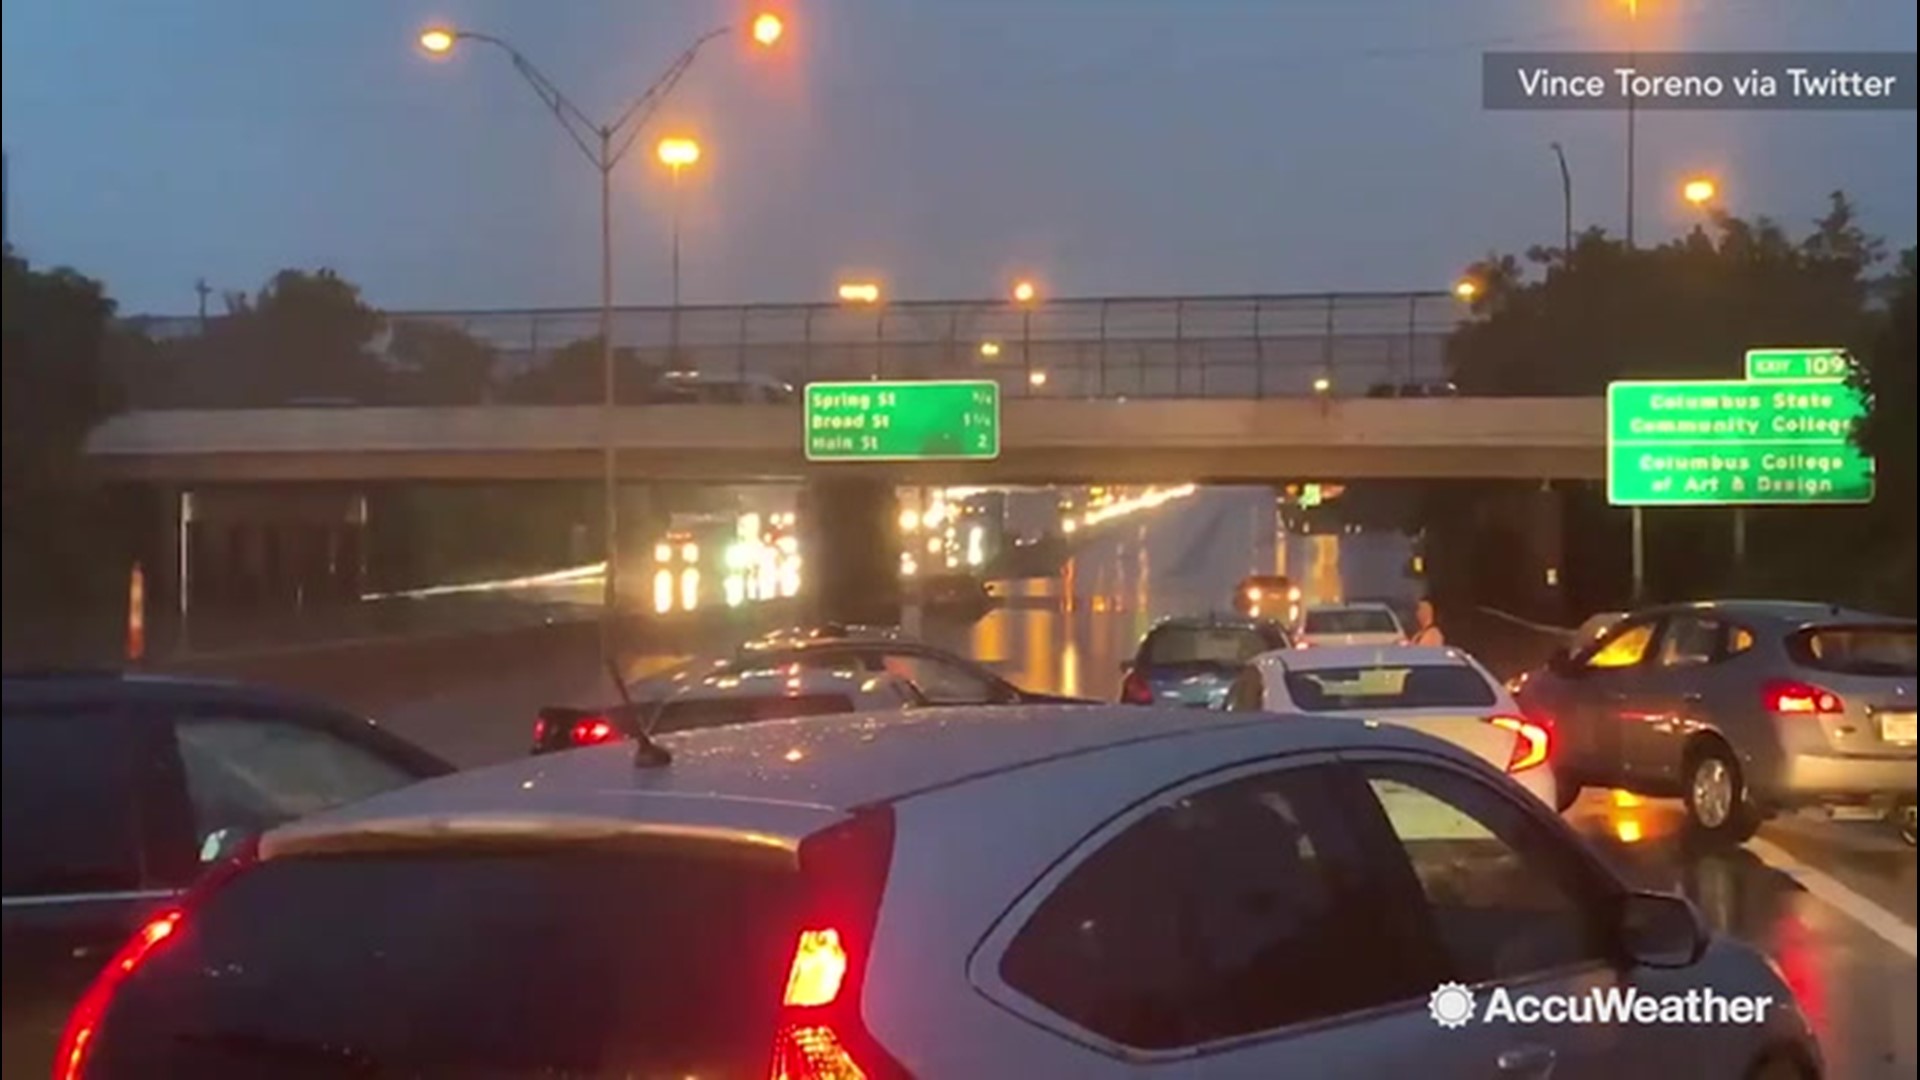 On June 19, flash flooding due to heavy rain endangered much of Ohio. Just north of Columbus, traffic  on Interstate 71 was brought to a stand still by floodwaters, which one Ohio Department of Transportation official compared to a lake.